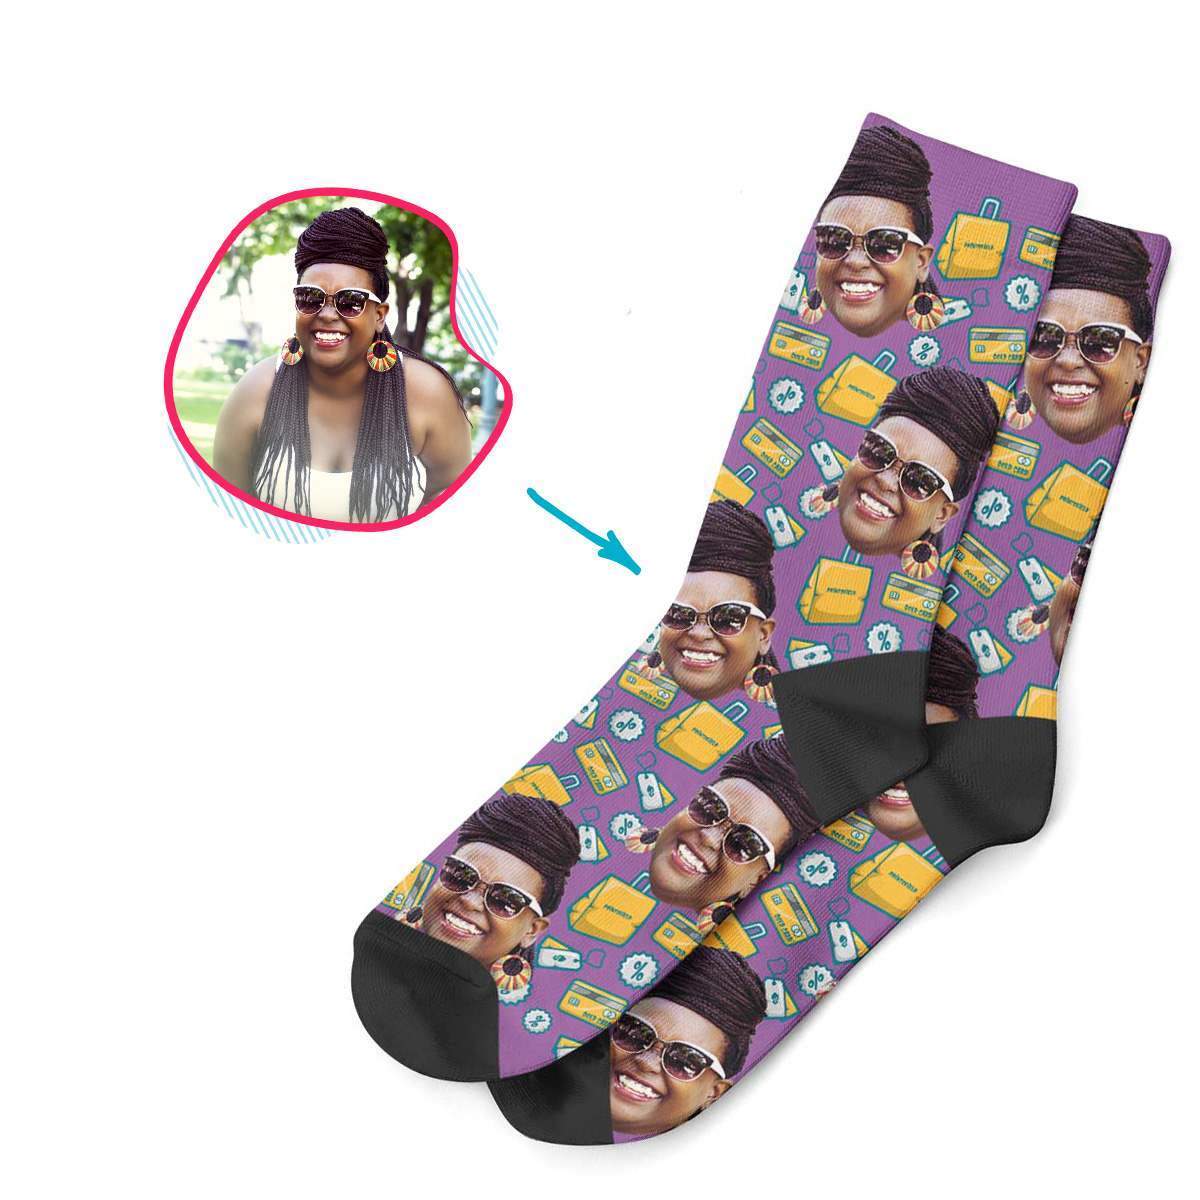 purple Shopping socks personalized with photo of face printed on them